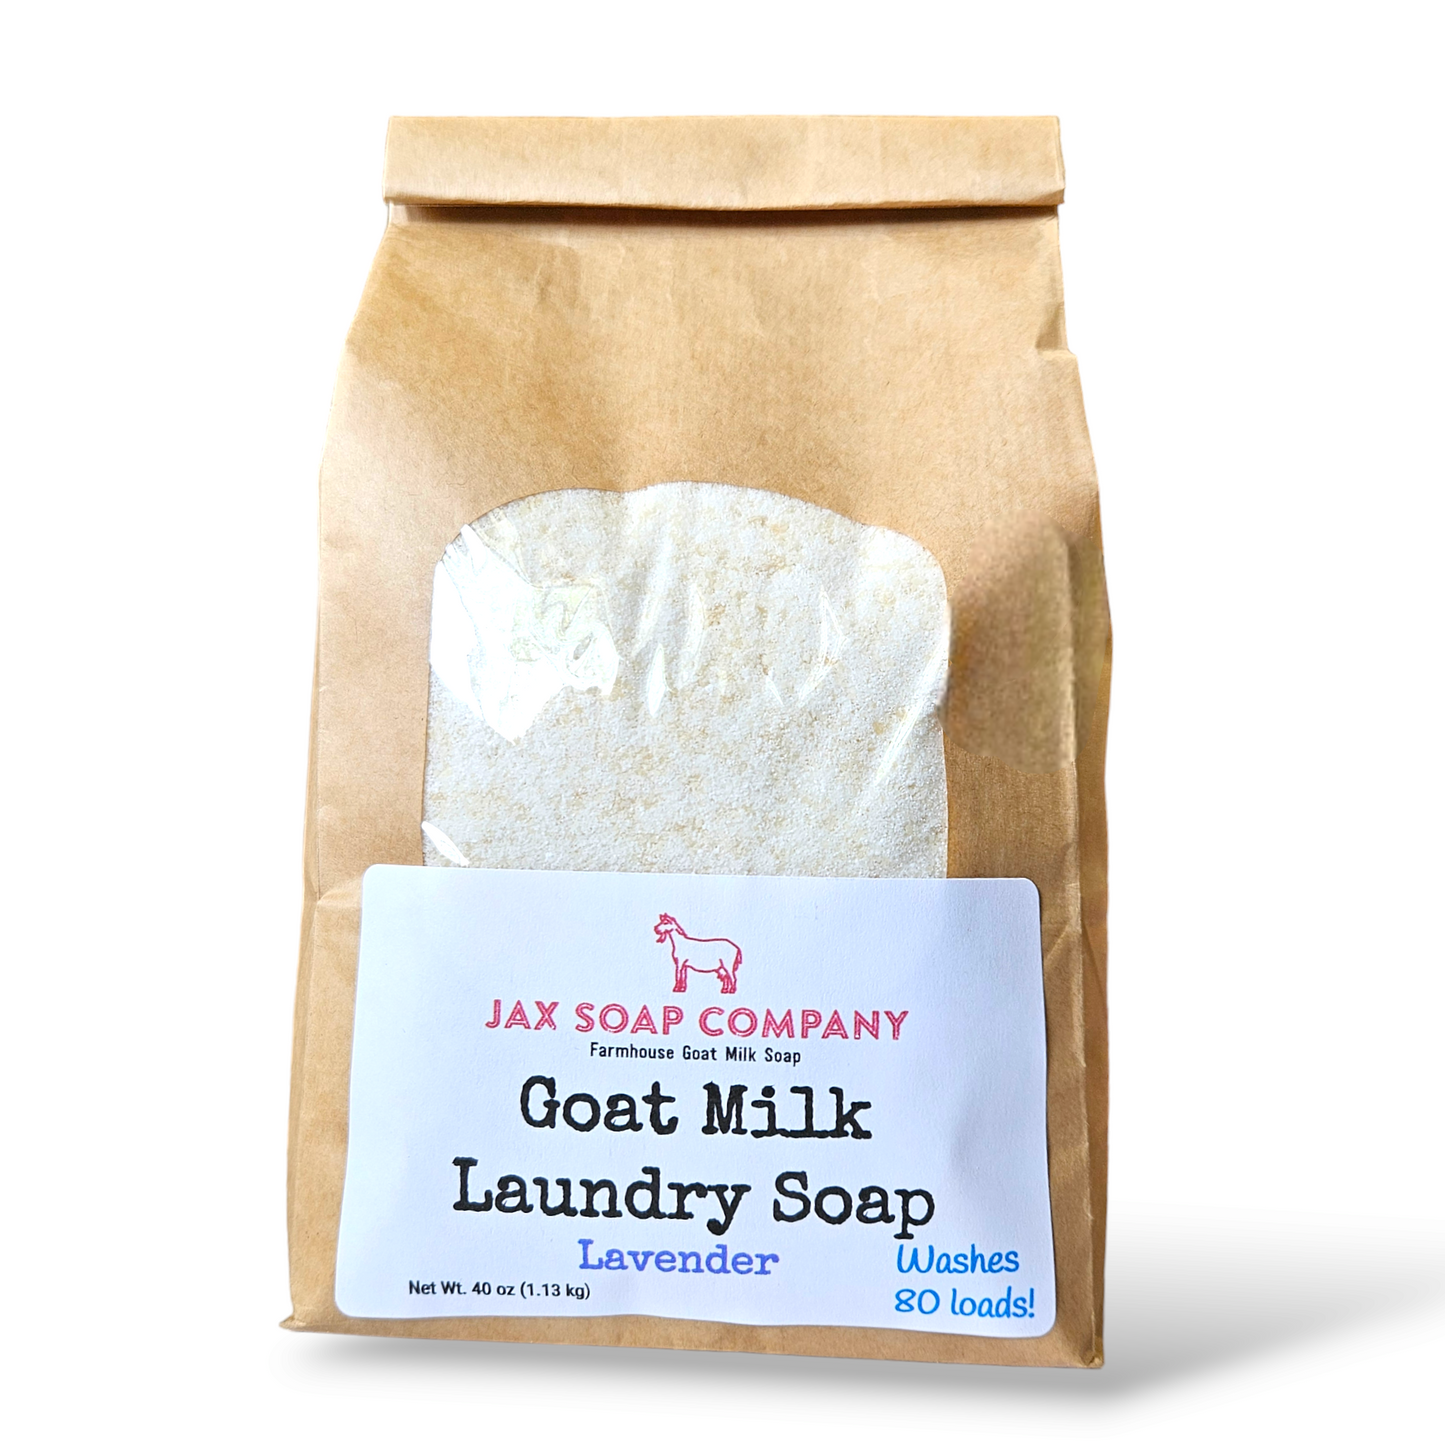 Goat Milk Laundry Soap Refill, 80 loads  Jax Soap Company Lavender With 1 tablespoon scoop 